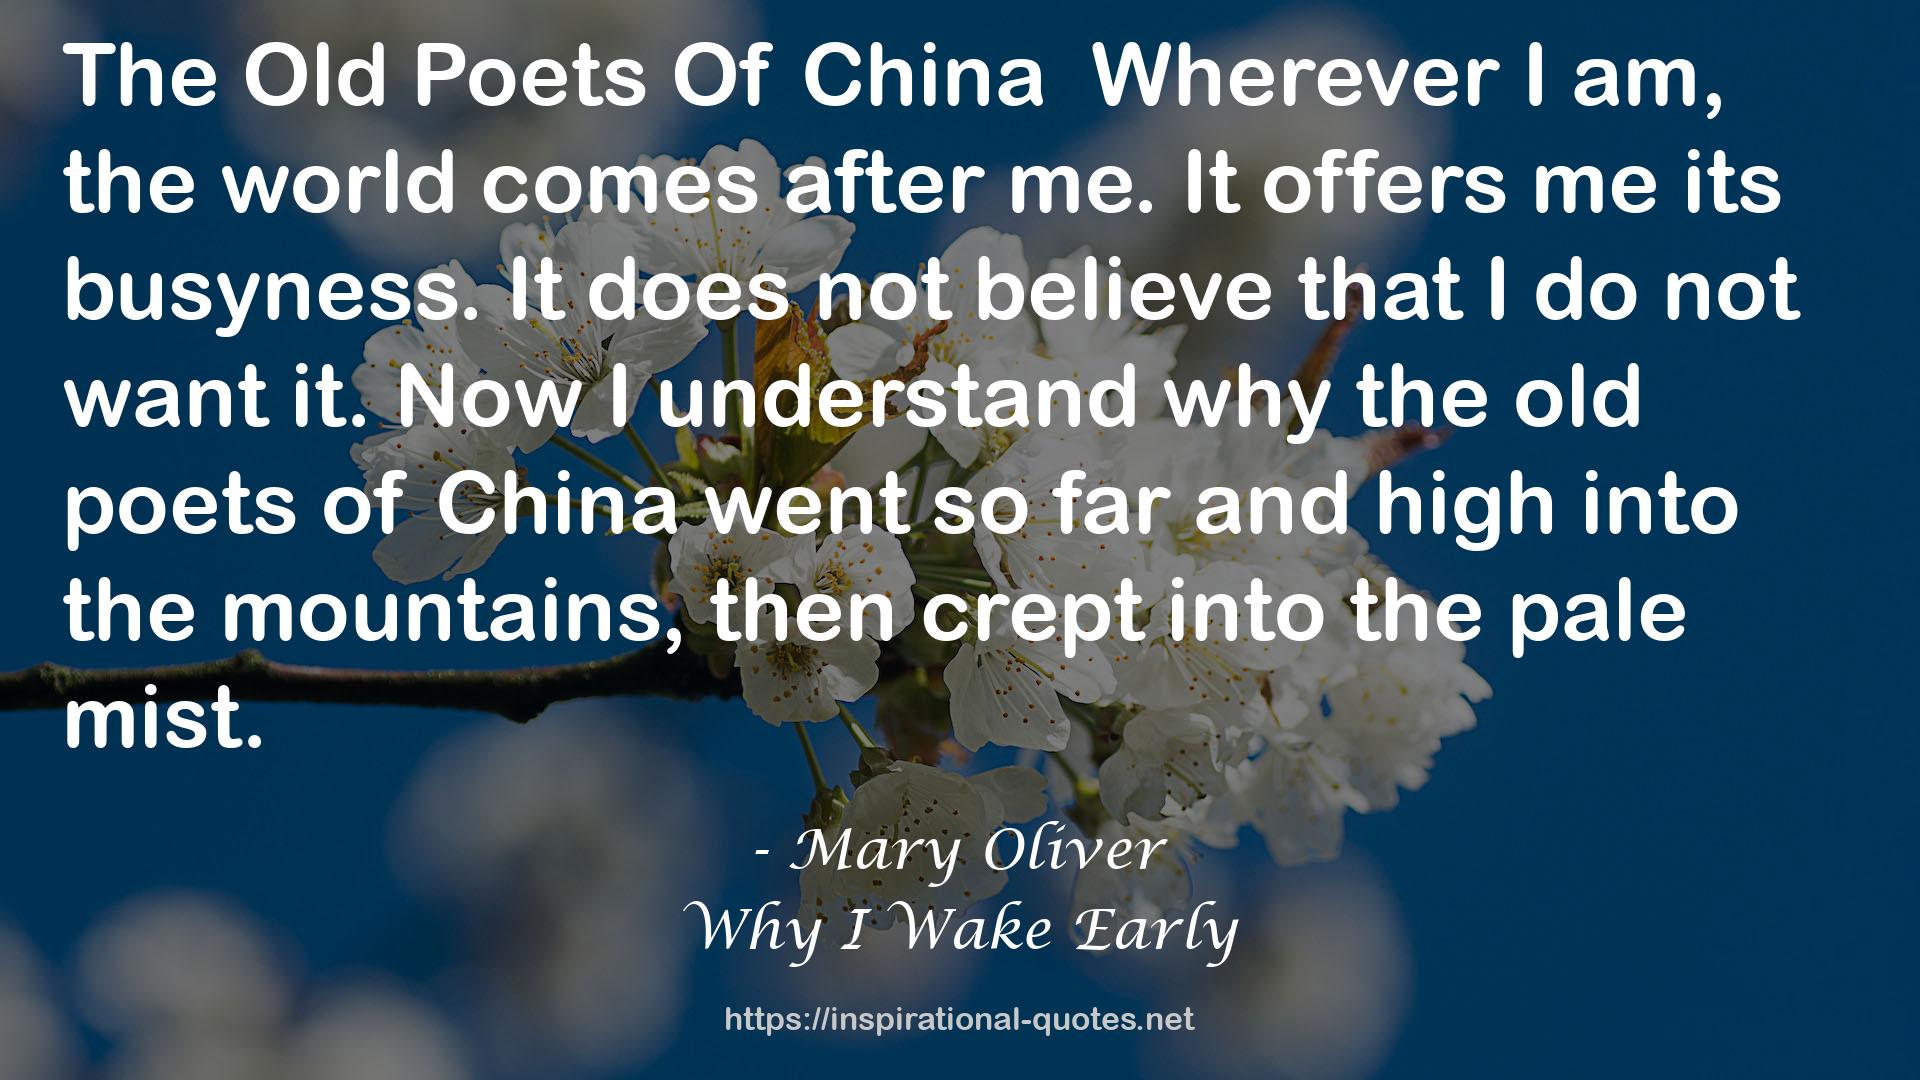 Mary Oliver QUOTES